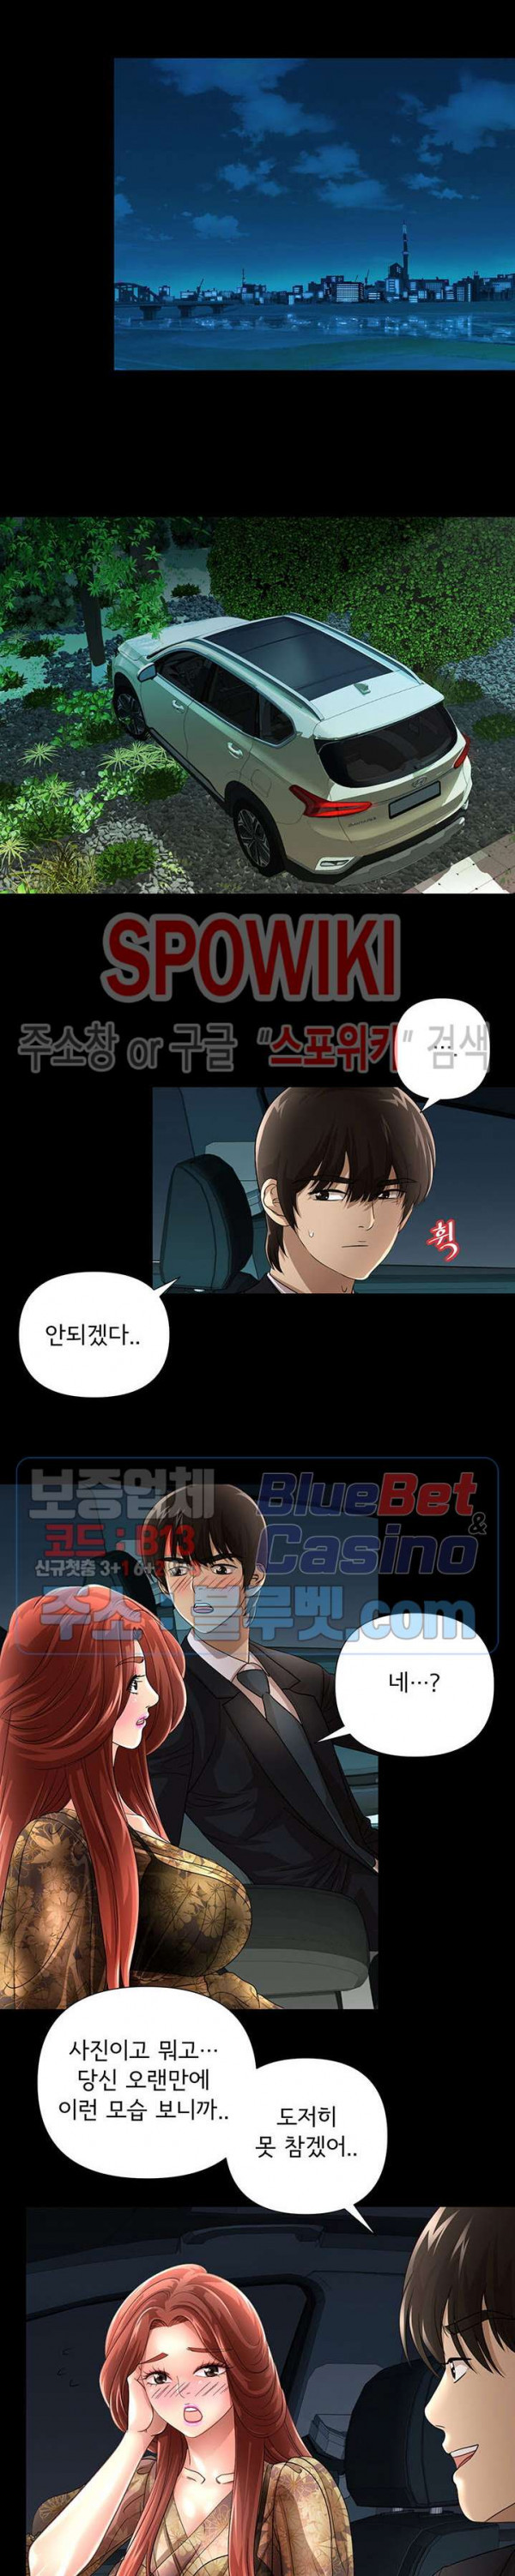 Mother and child - Chapter 16 - MANYTOON - MANHWA 18 RAW